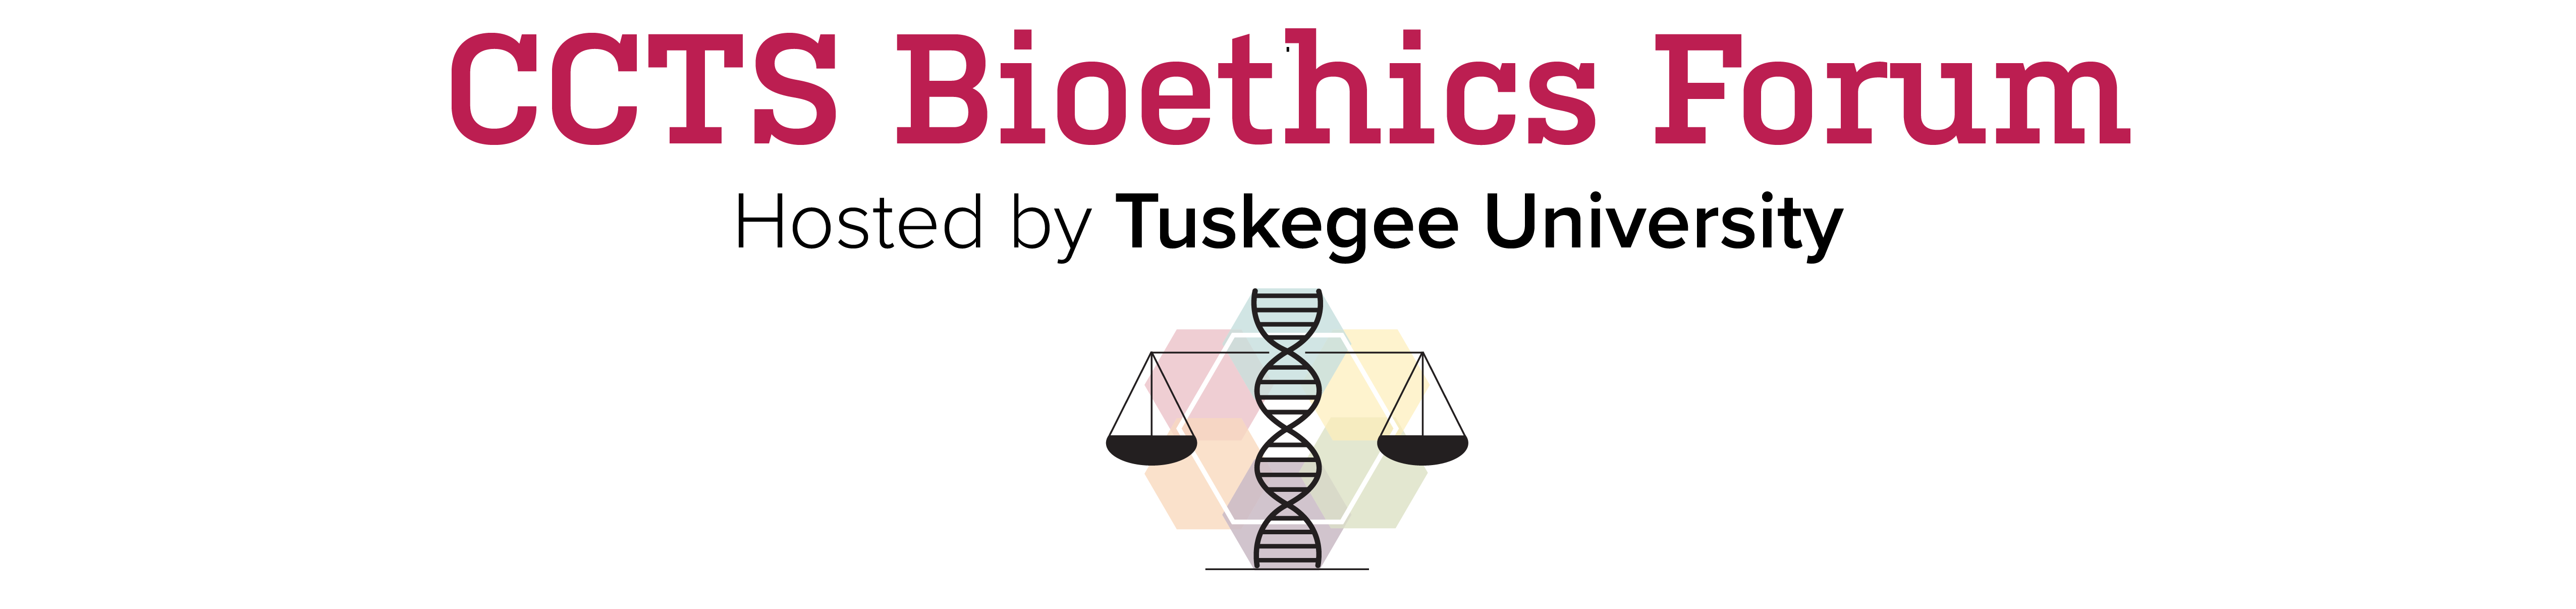 Annual CCTS Bioethics Forum